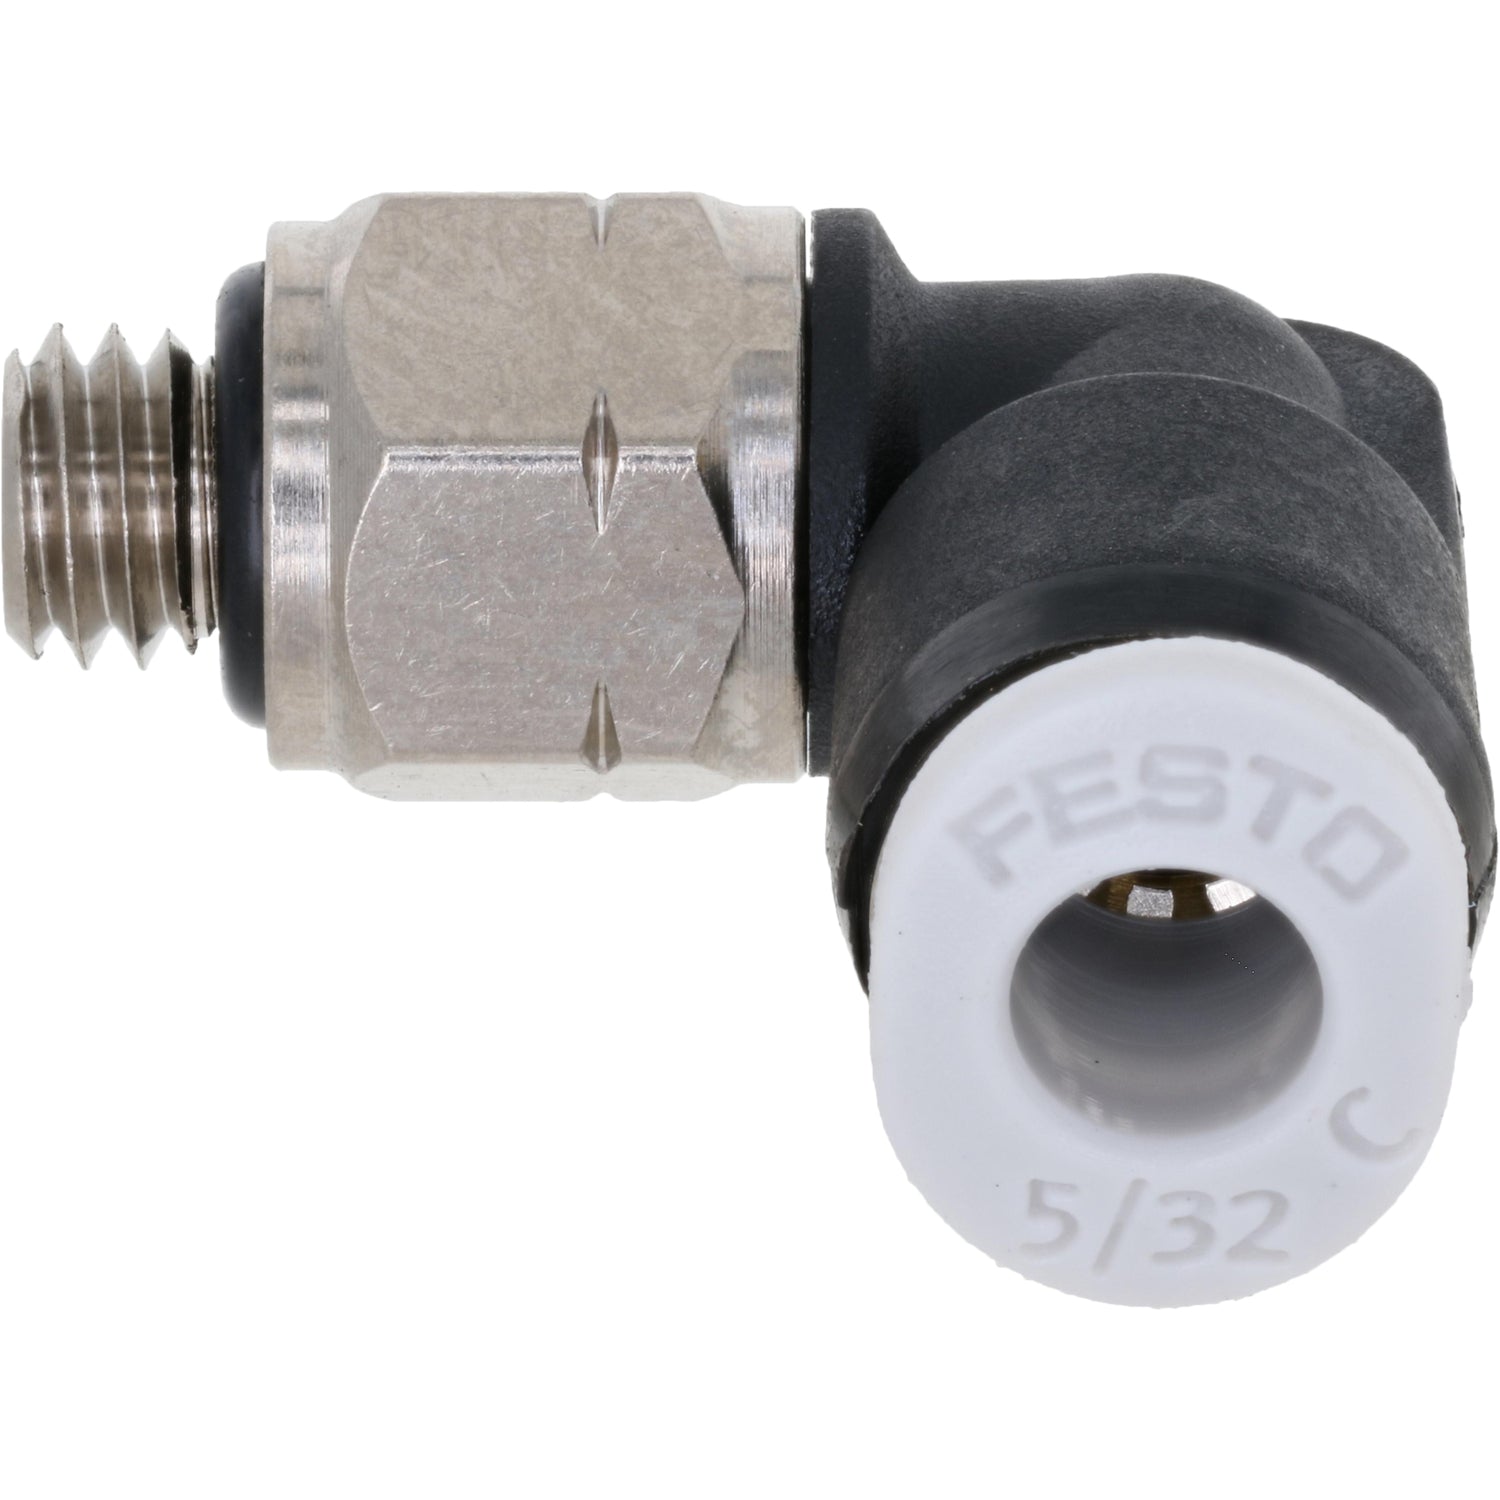 Black and grey L shaped push connect fitting with stainless steel mounting flats and 10-32 threads shown on white background. 